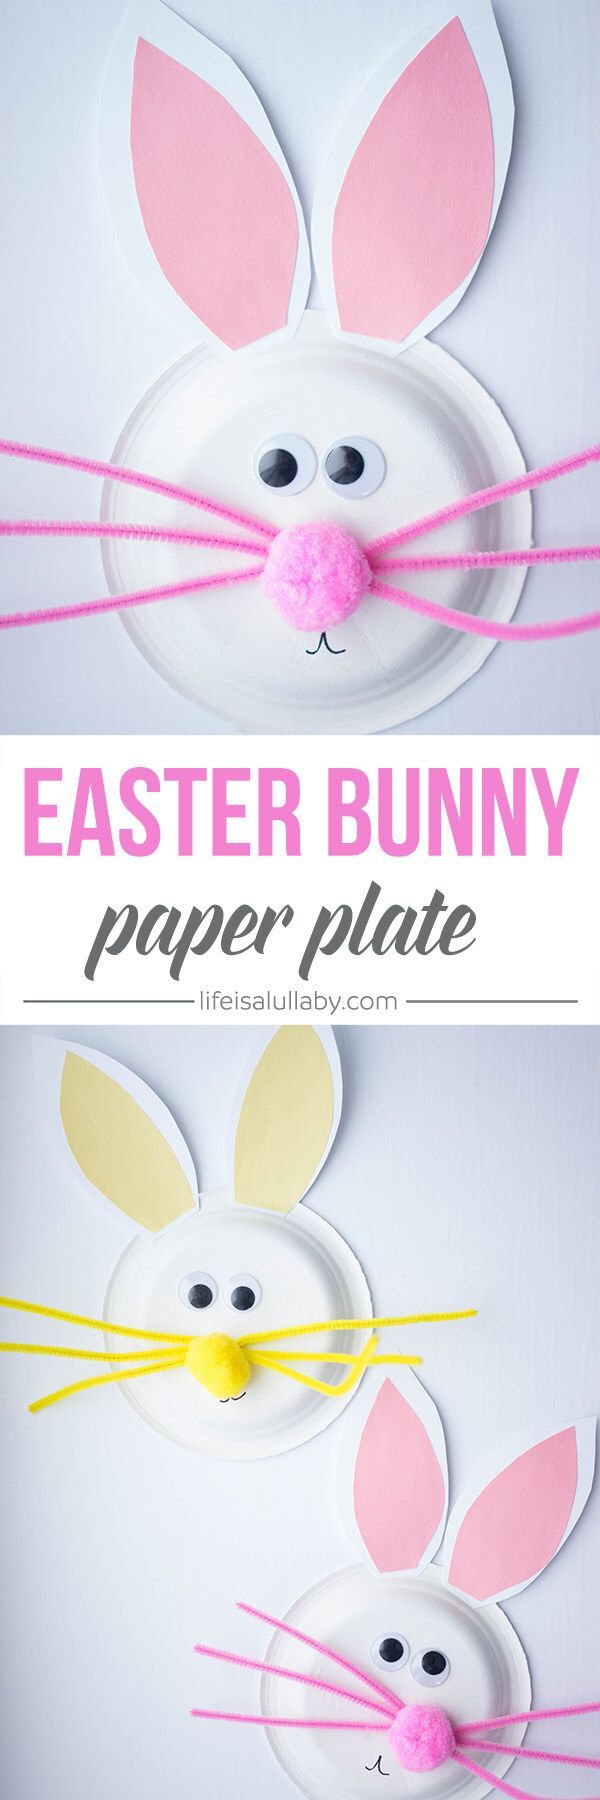 This paper plate Easter Bunny is so cute! I love how easy this is to make and a really fun kids craft to do with the kids!